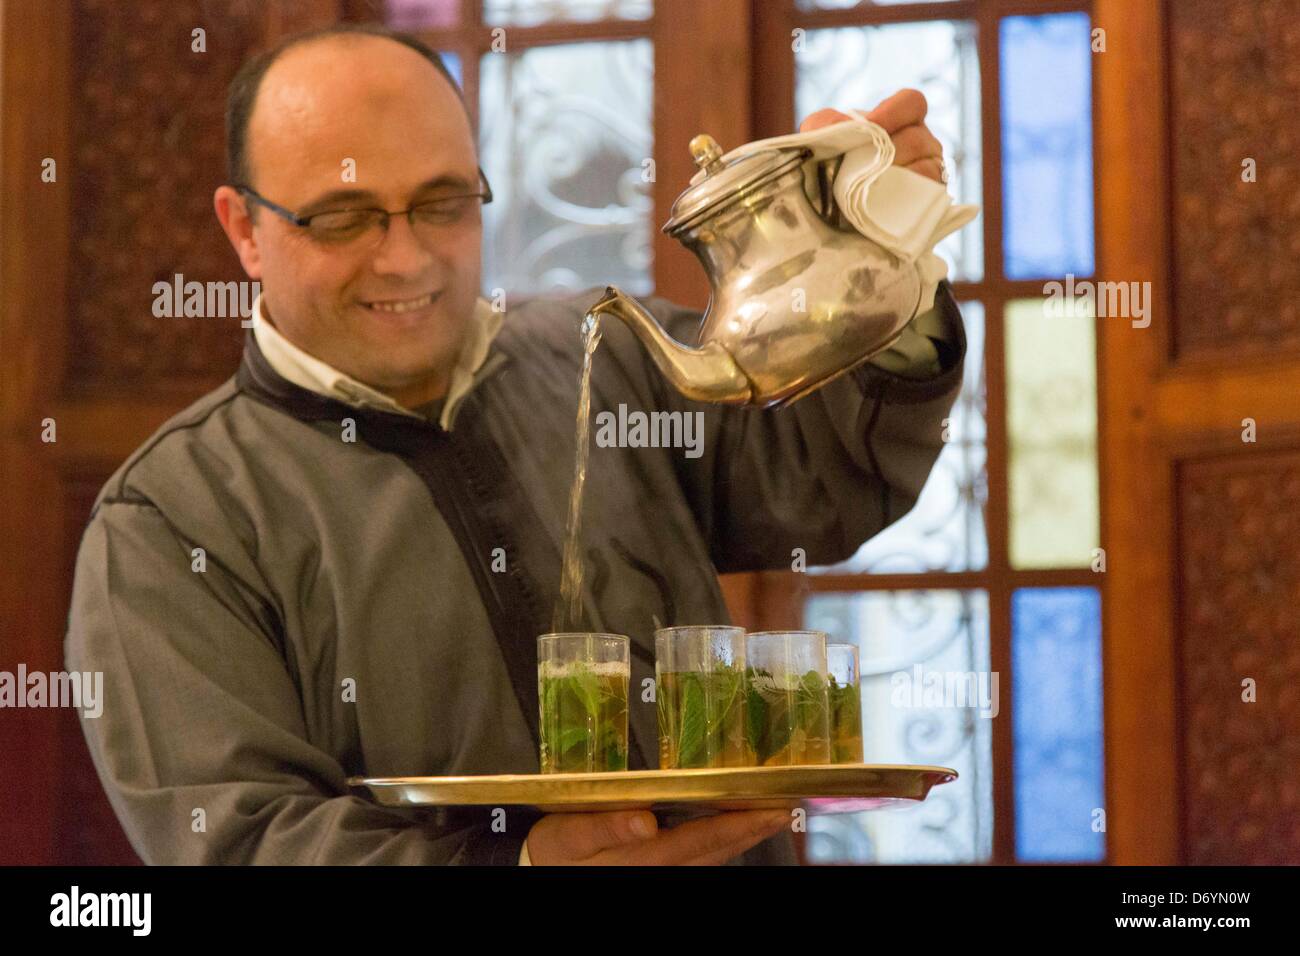 traditional mint tea ceremony in a restaurant in Fez, Marocco Stock Photo